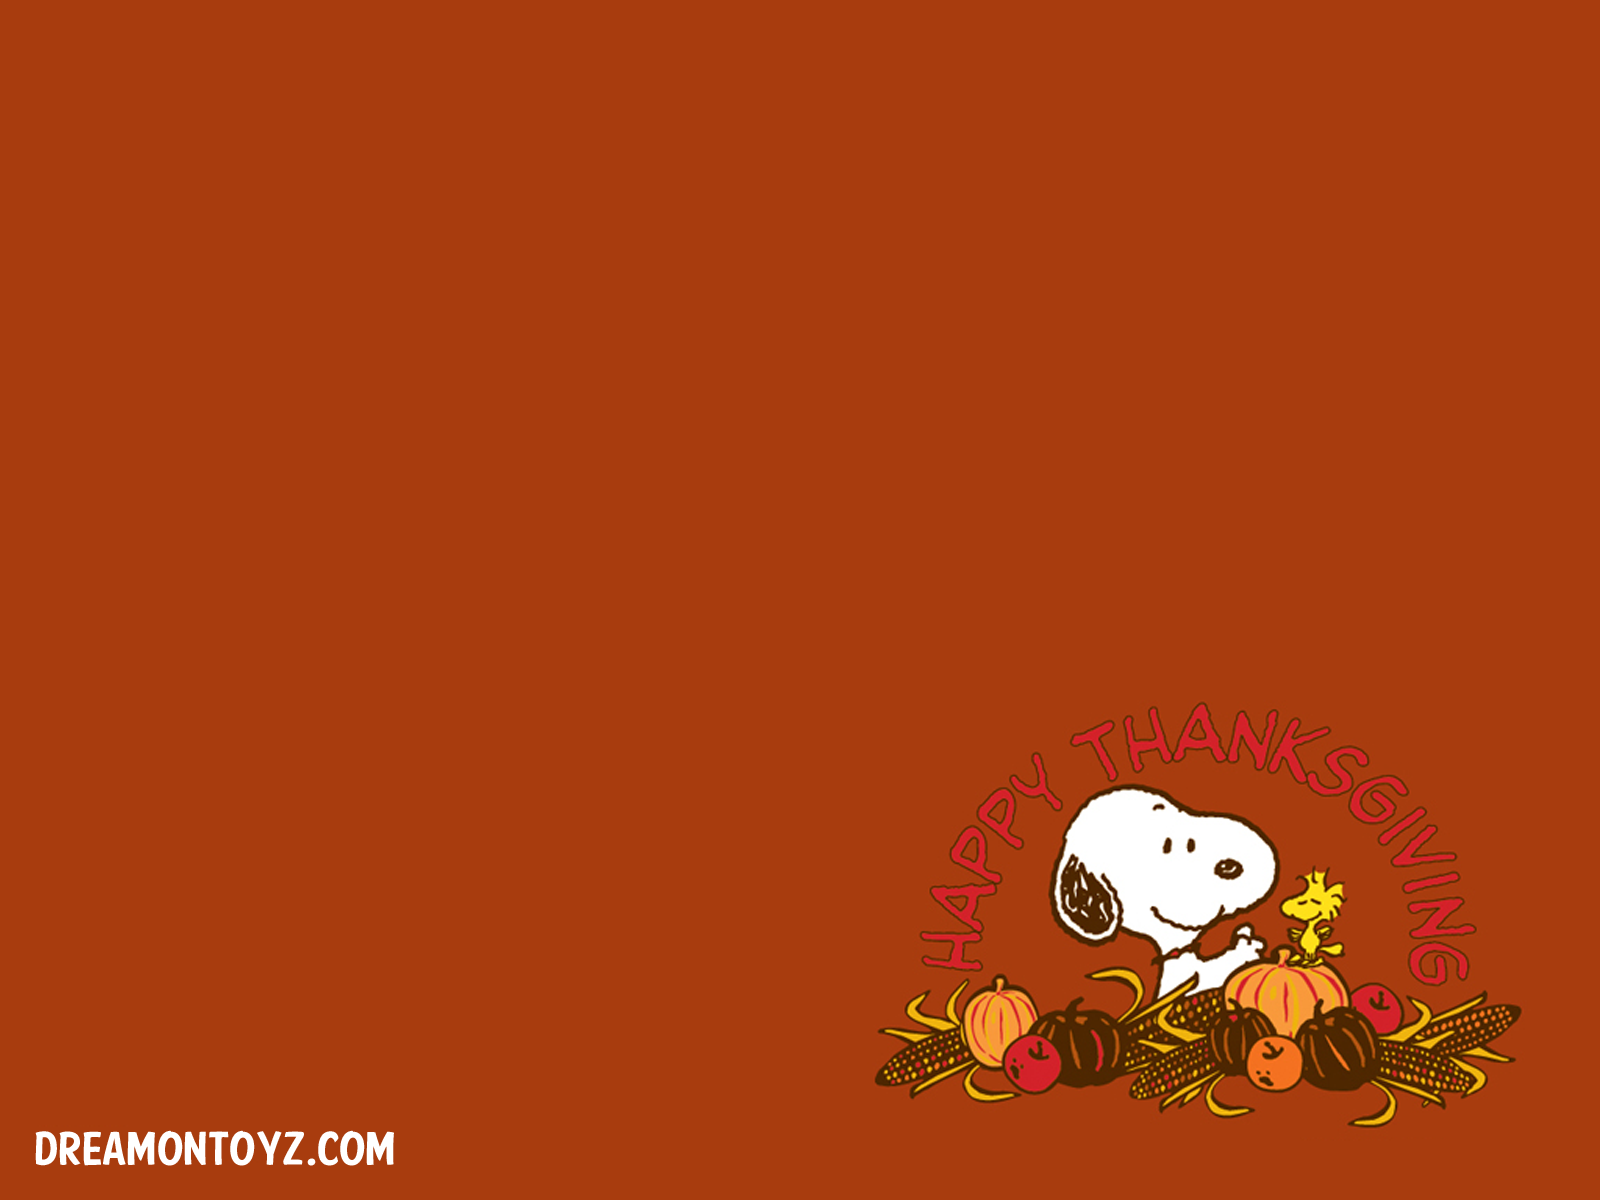 Snoopy Thanksgiving Wallpapers - Wallpaper Cave